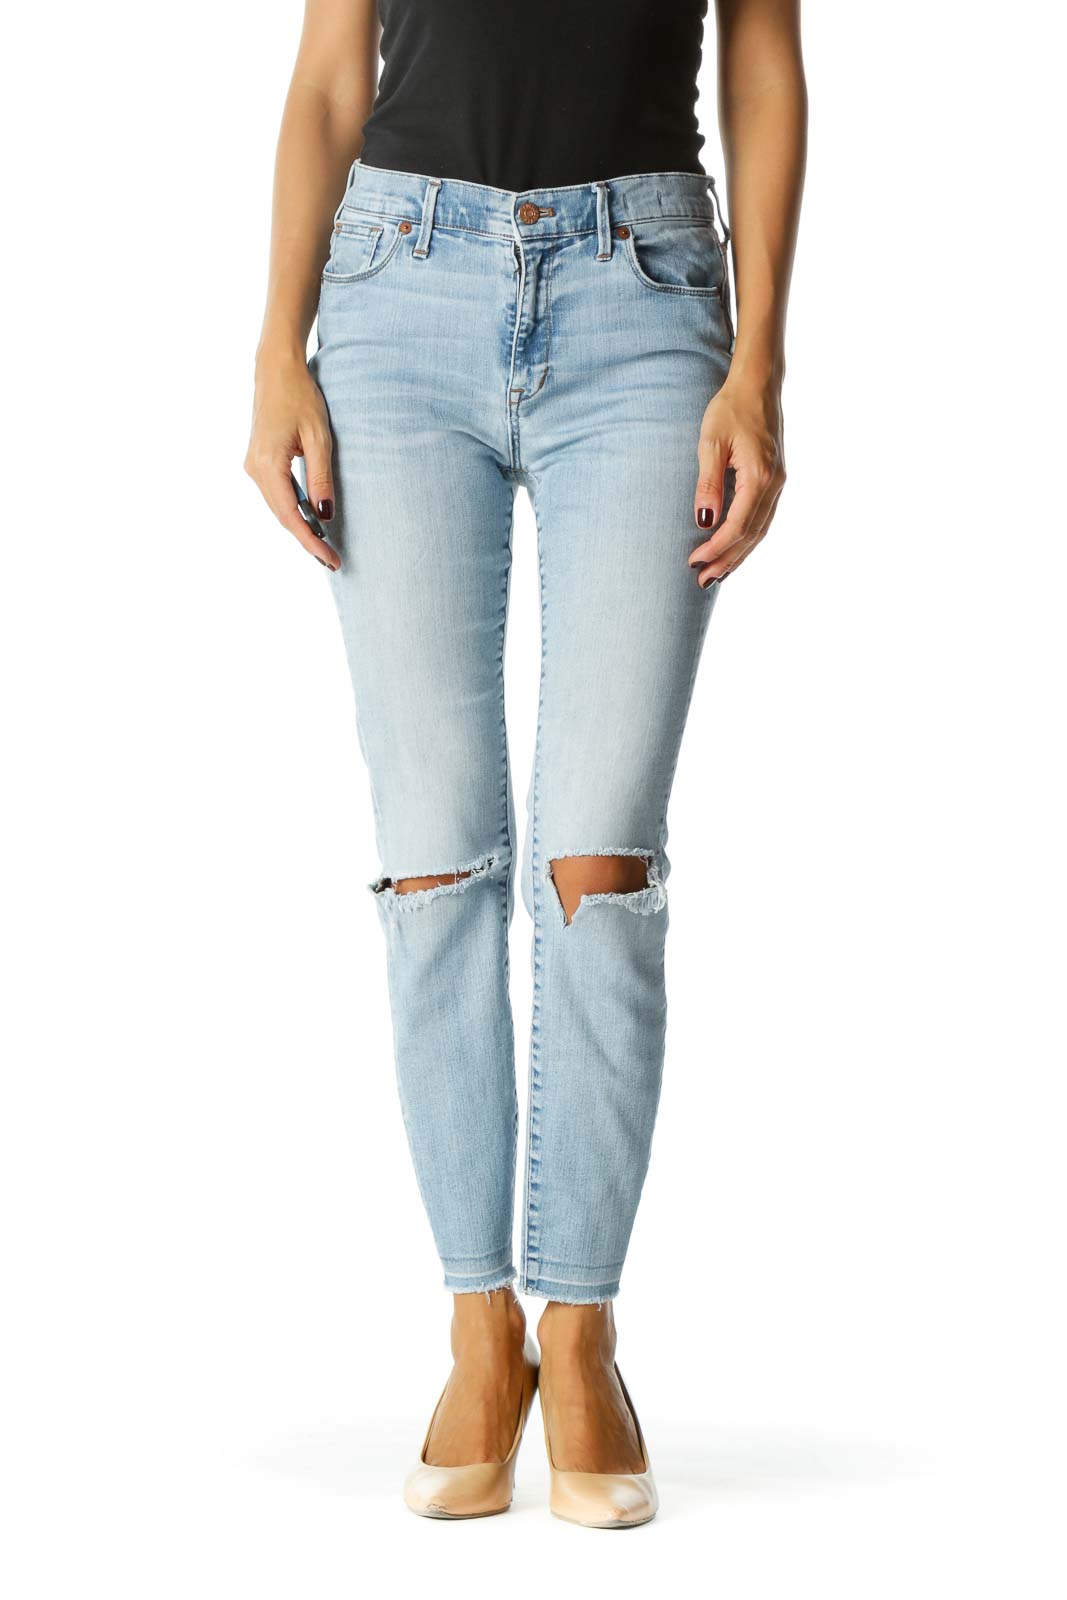 Madewell - Light Blue Distressed High-Waisted Skinny Jeans Polyester2 ...